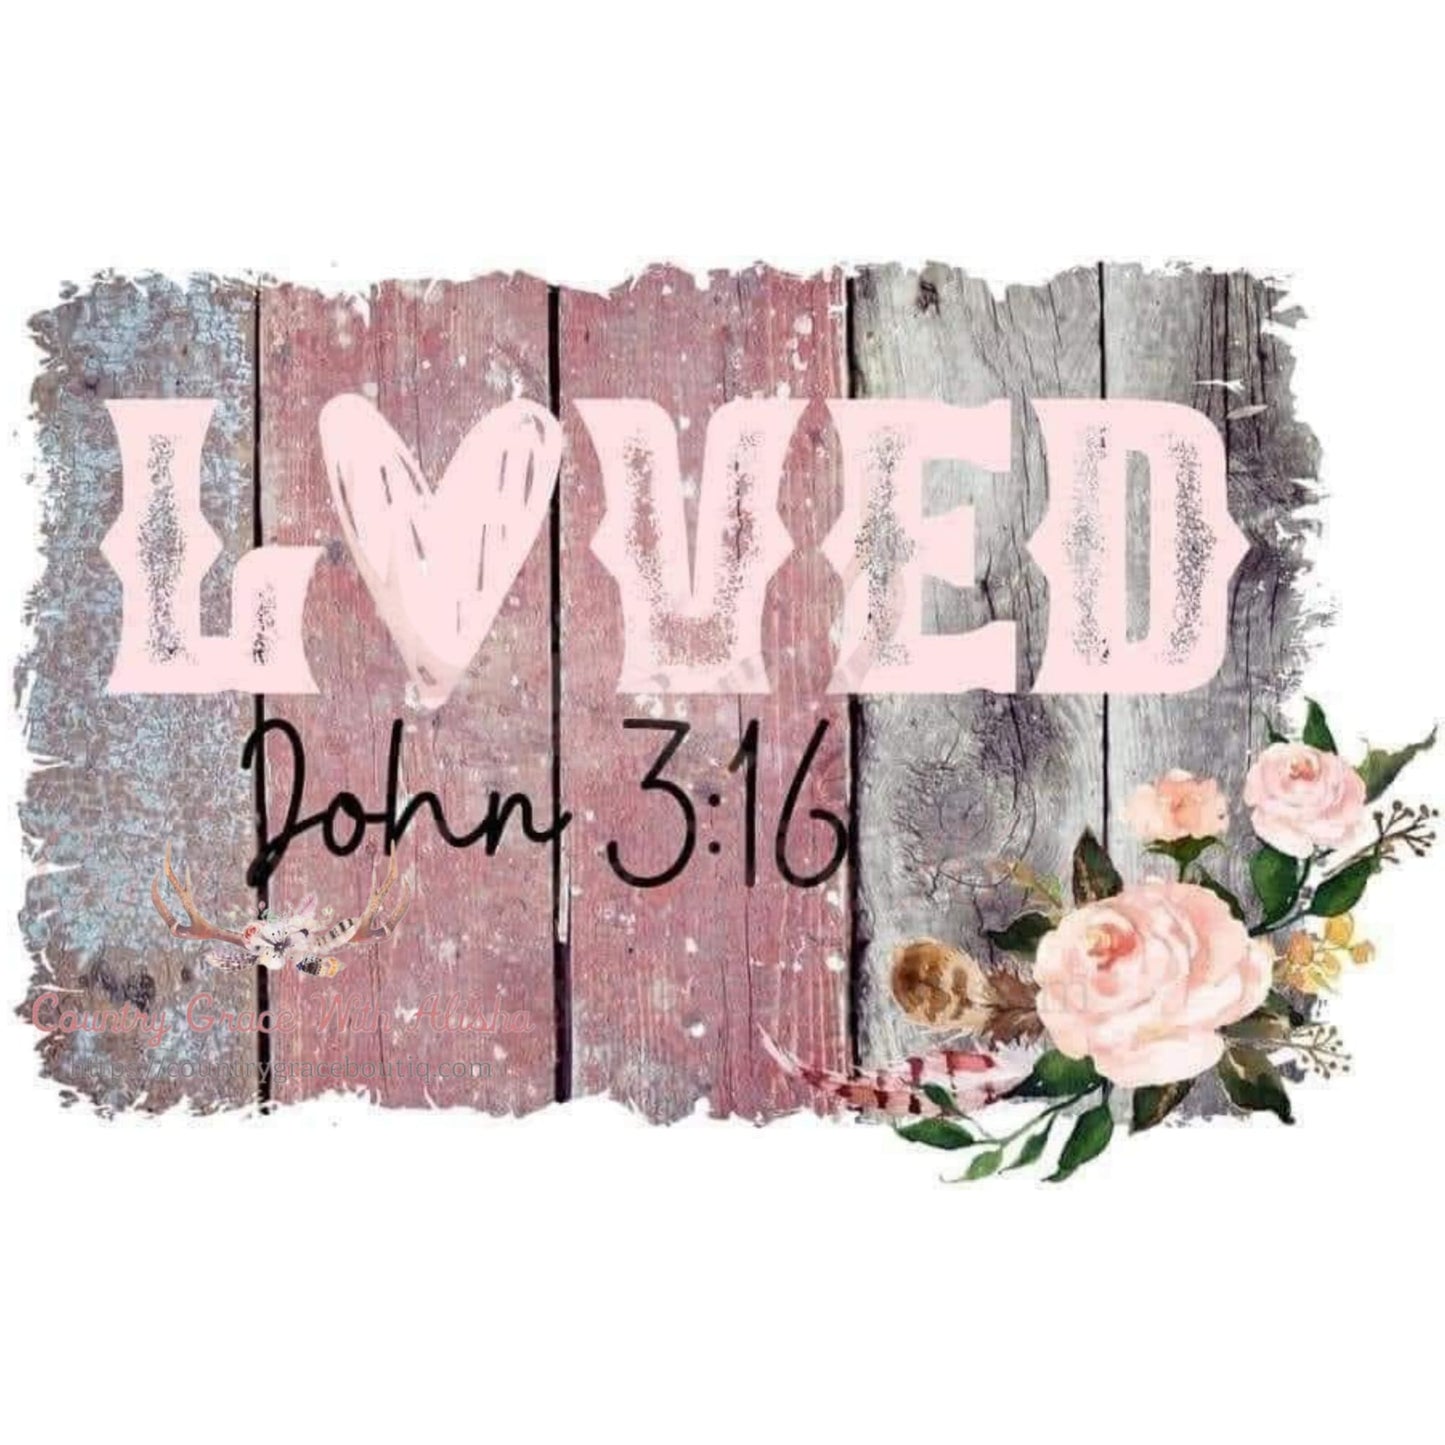 Loved John 3:16 Sublimation Transfer - Sub $1.50 Country 